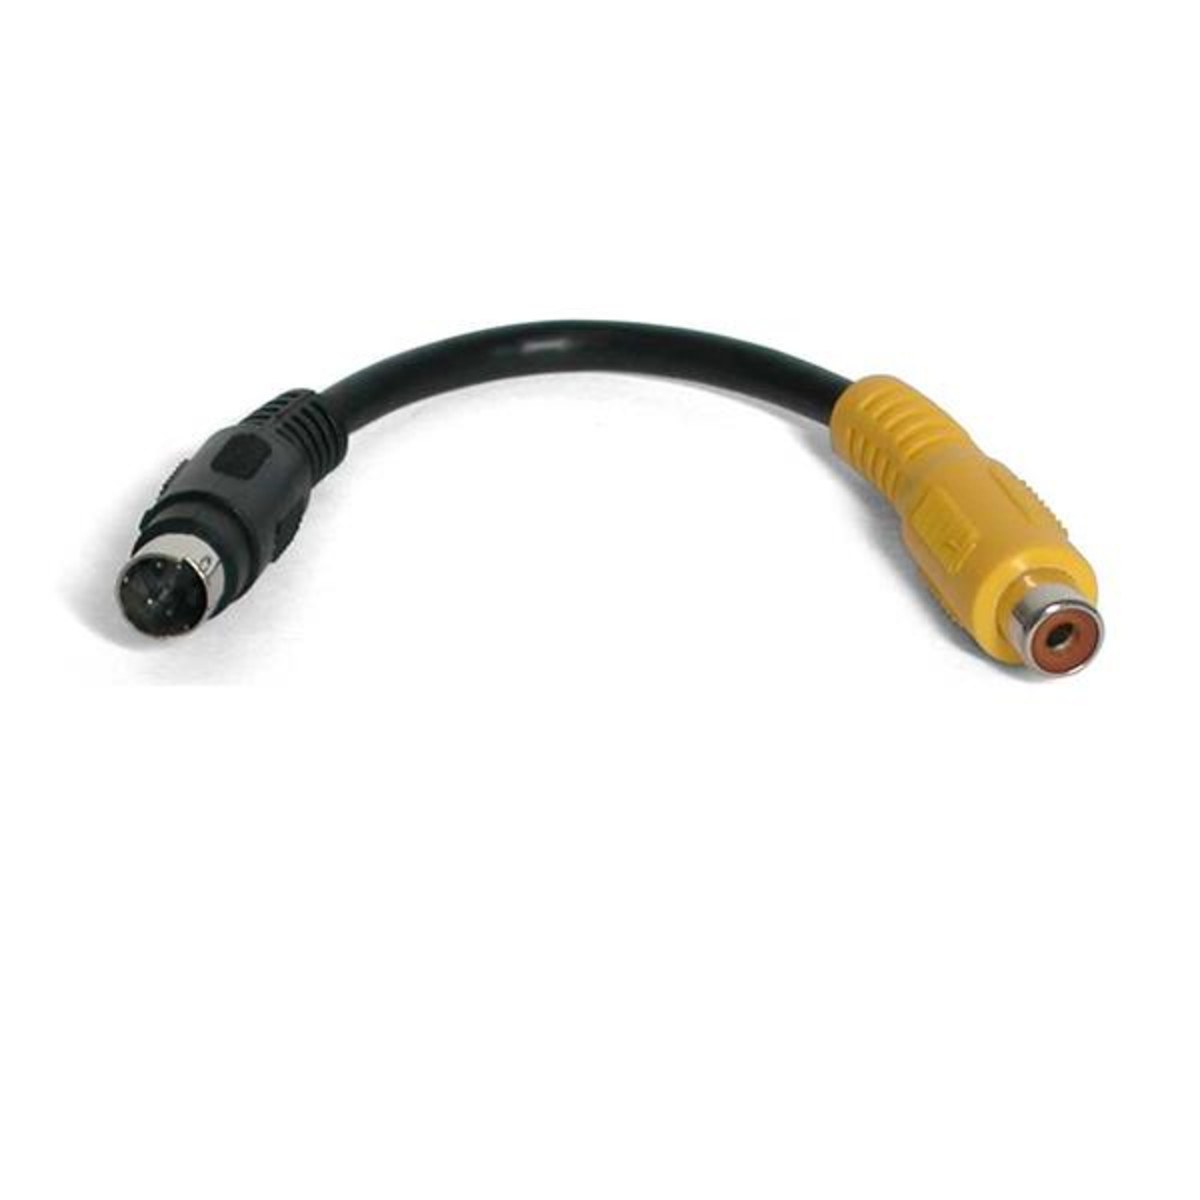 6in S-Video to Comp Video Adapter Cable